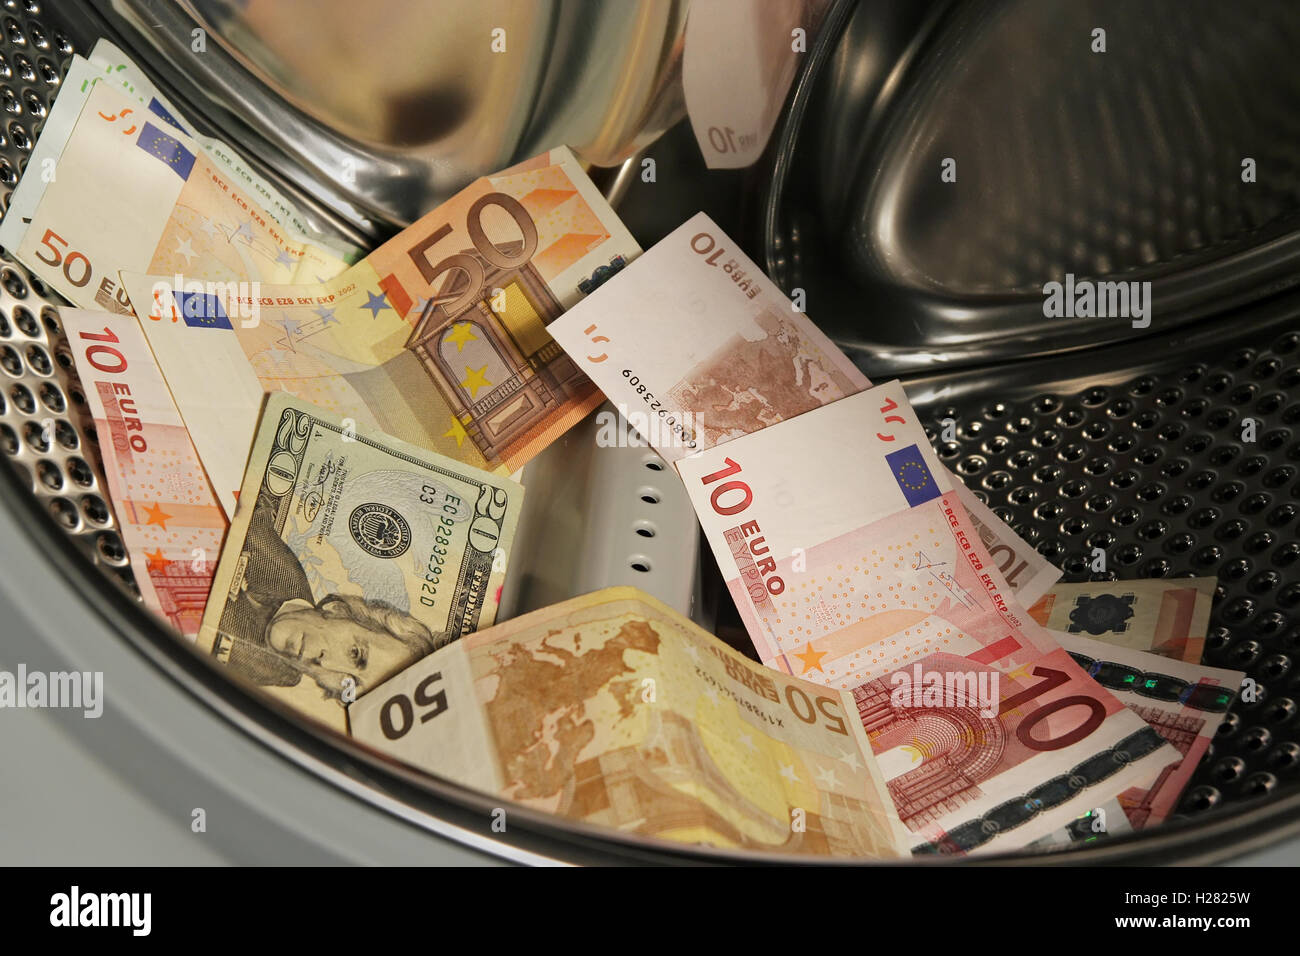 Money in the washing machine. Paper banknotes in laundry. Currency in the washing machine. Stock Photo